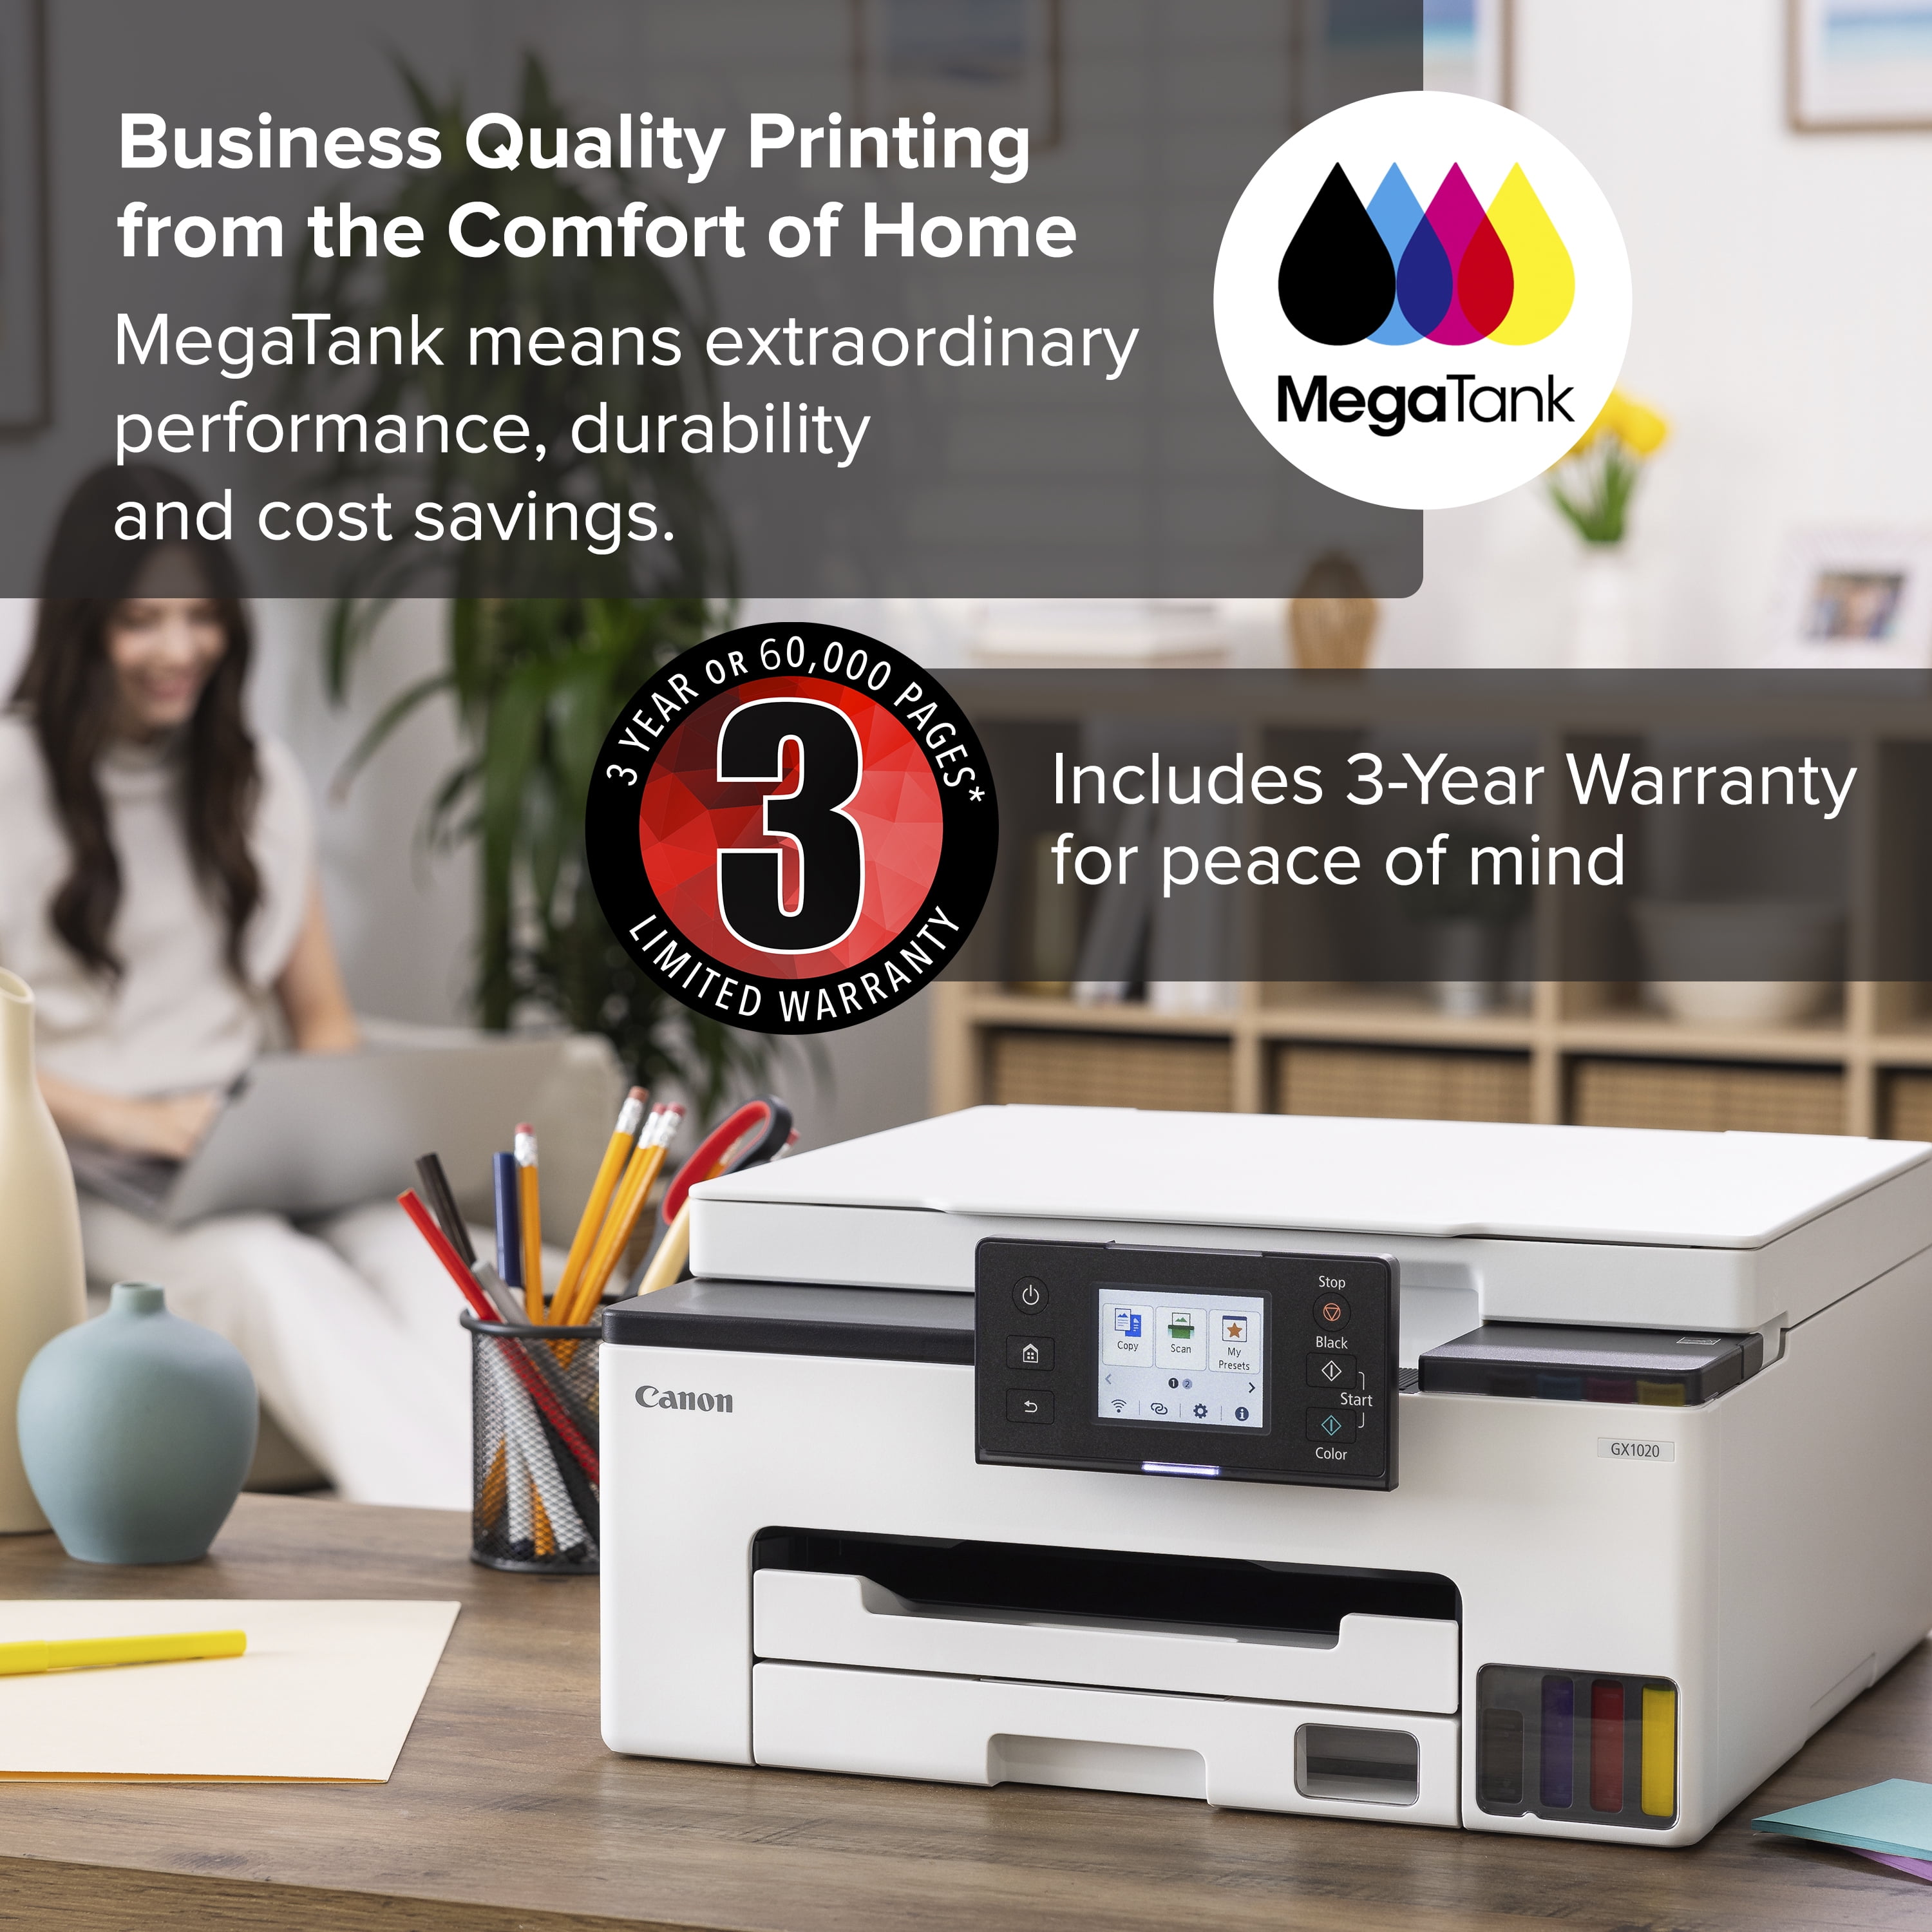 MAXIFY GX1020 Wireless MegaTank Home and Office All-in-One Printer